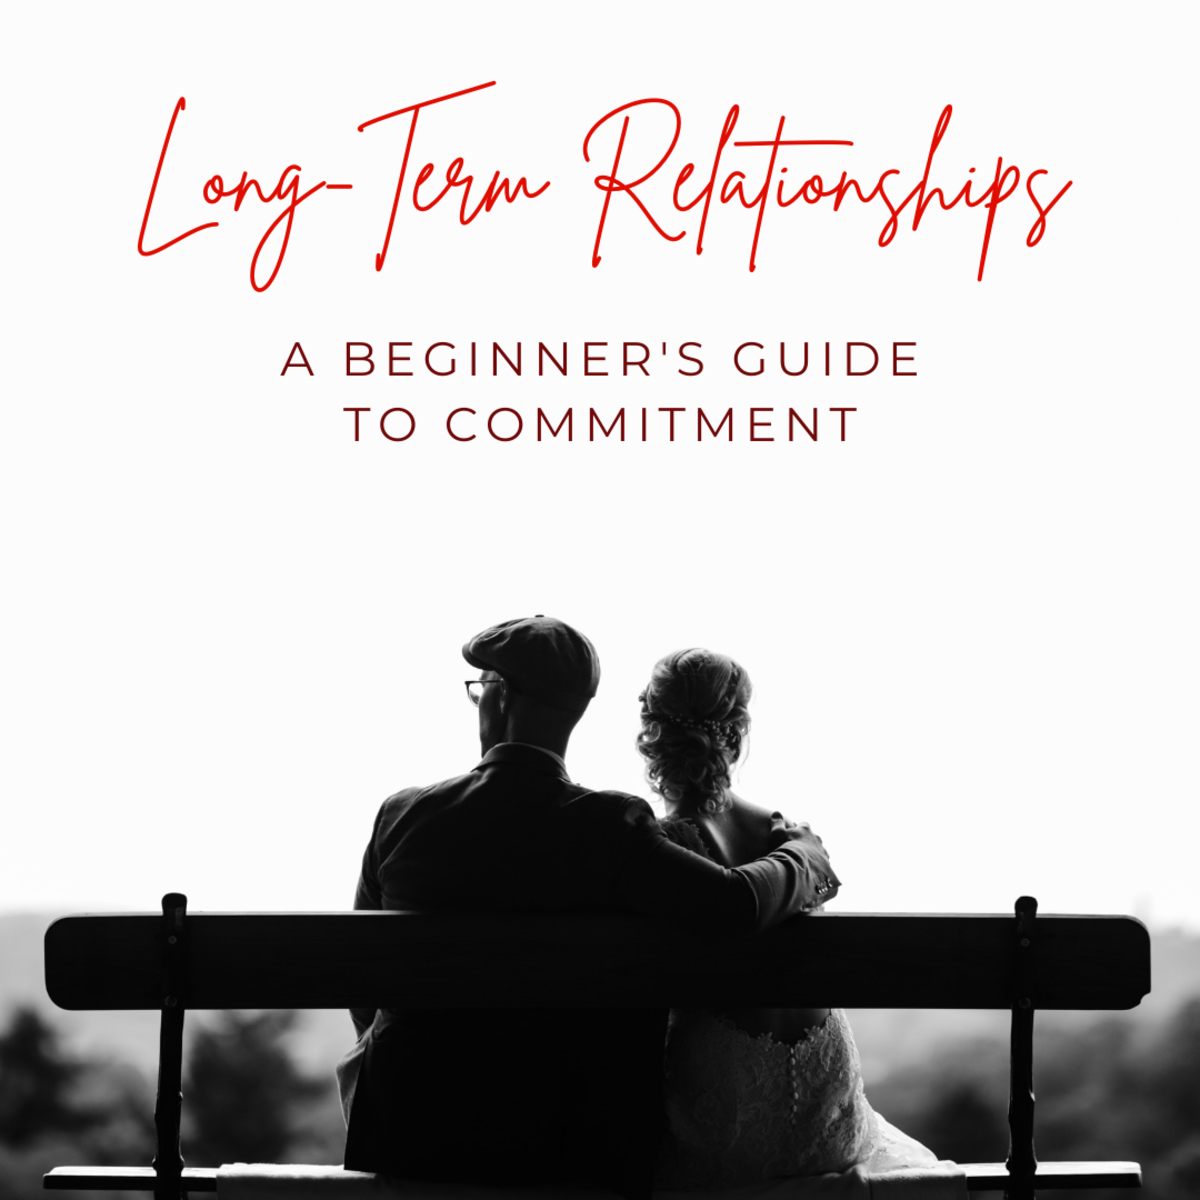 This guide will offer you some helpful beginner's tips for maintaining a healthy long-term relationship.